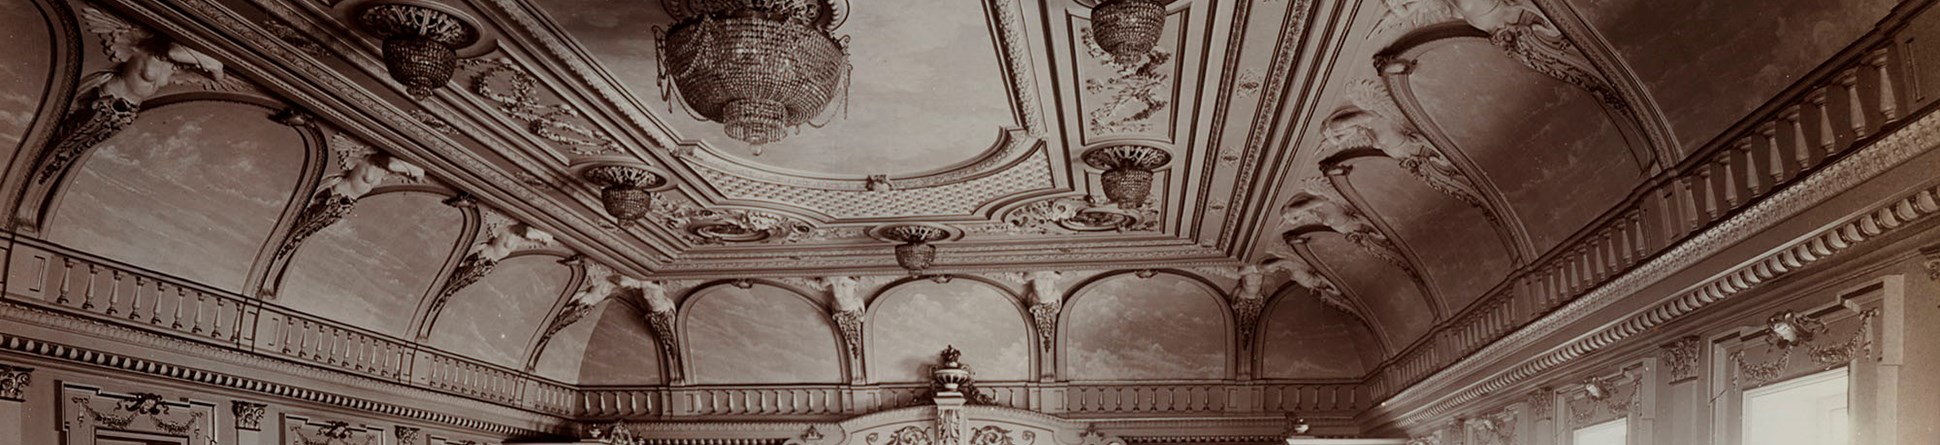 Fibrous plaster ceilings require survey by a competent plasterwork inspector and repair and maintenance by a competent plasterwork contractor familiar with these historic constructions.